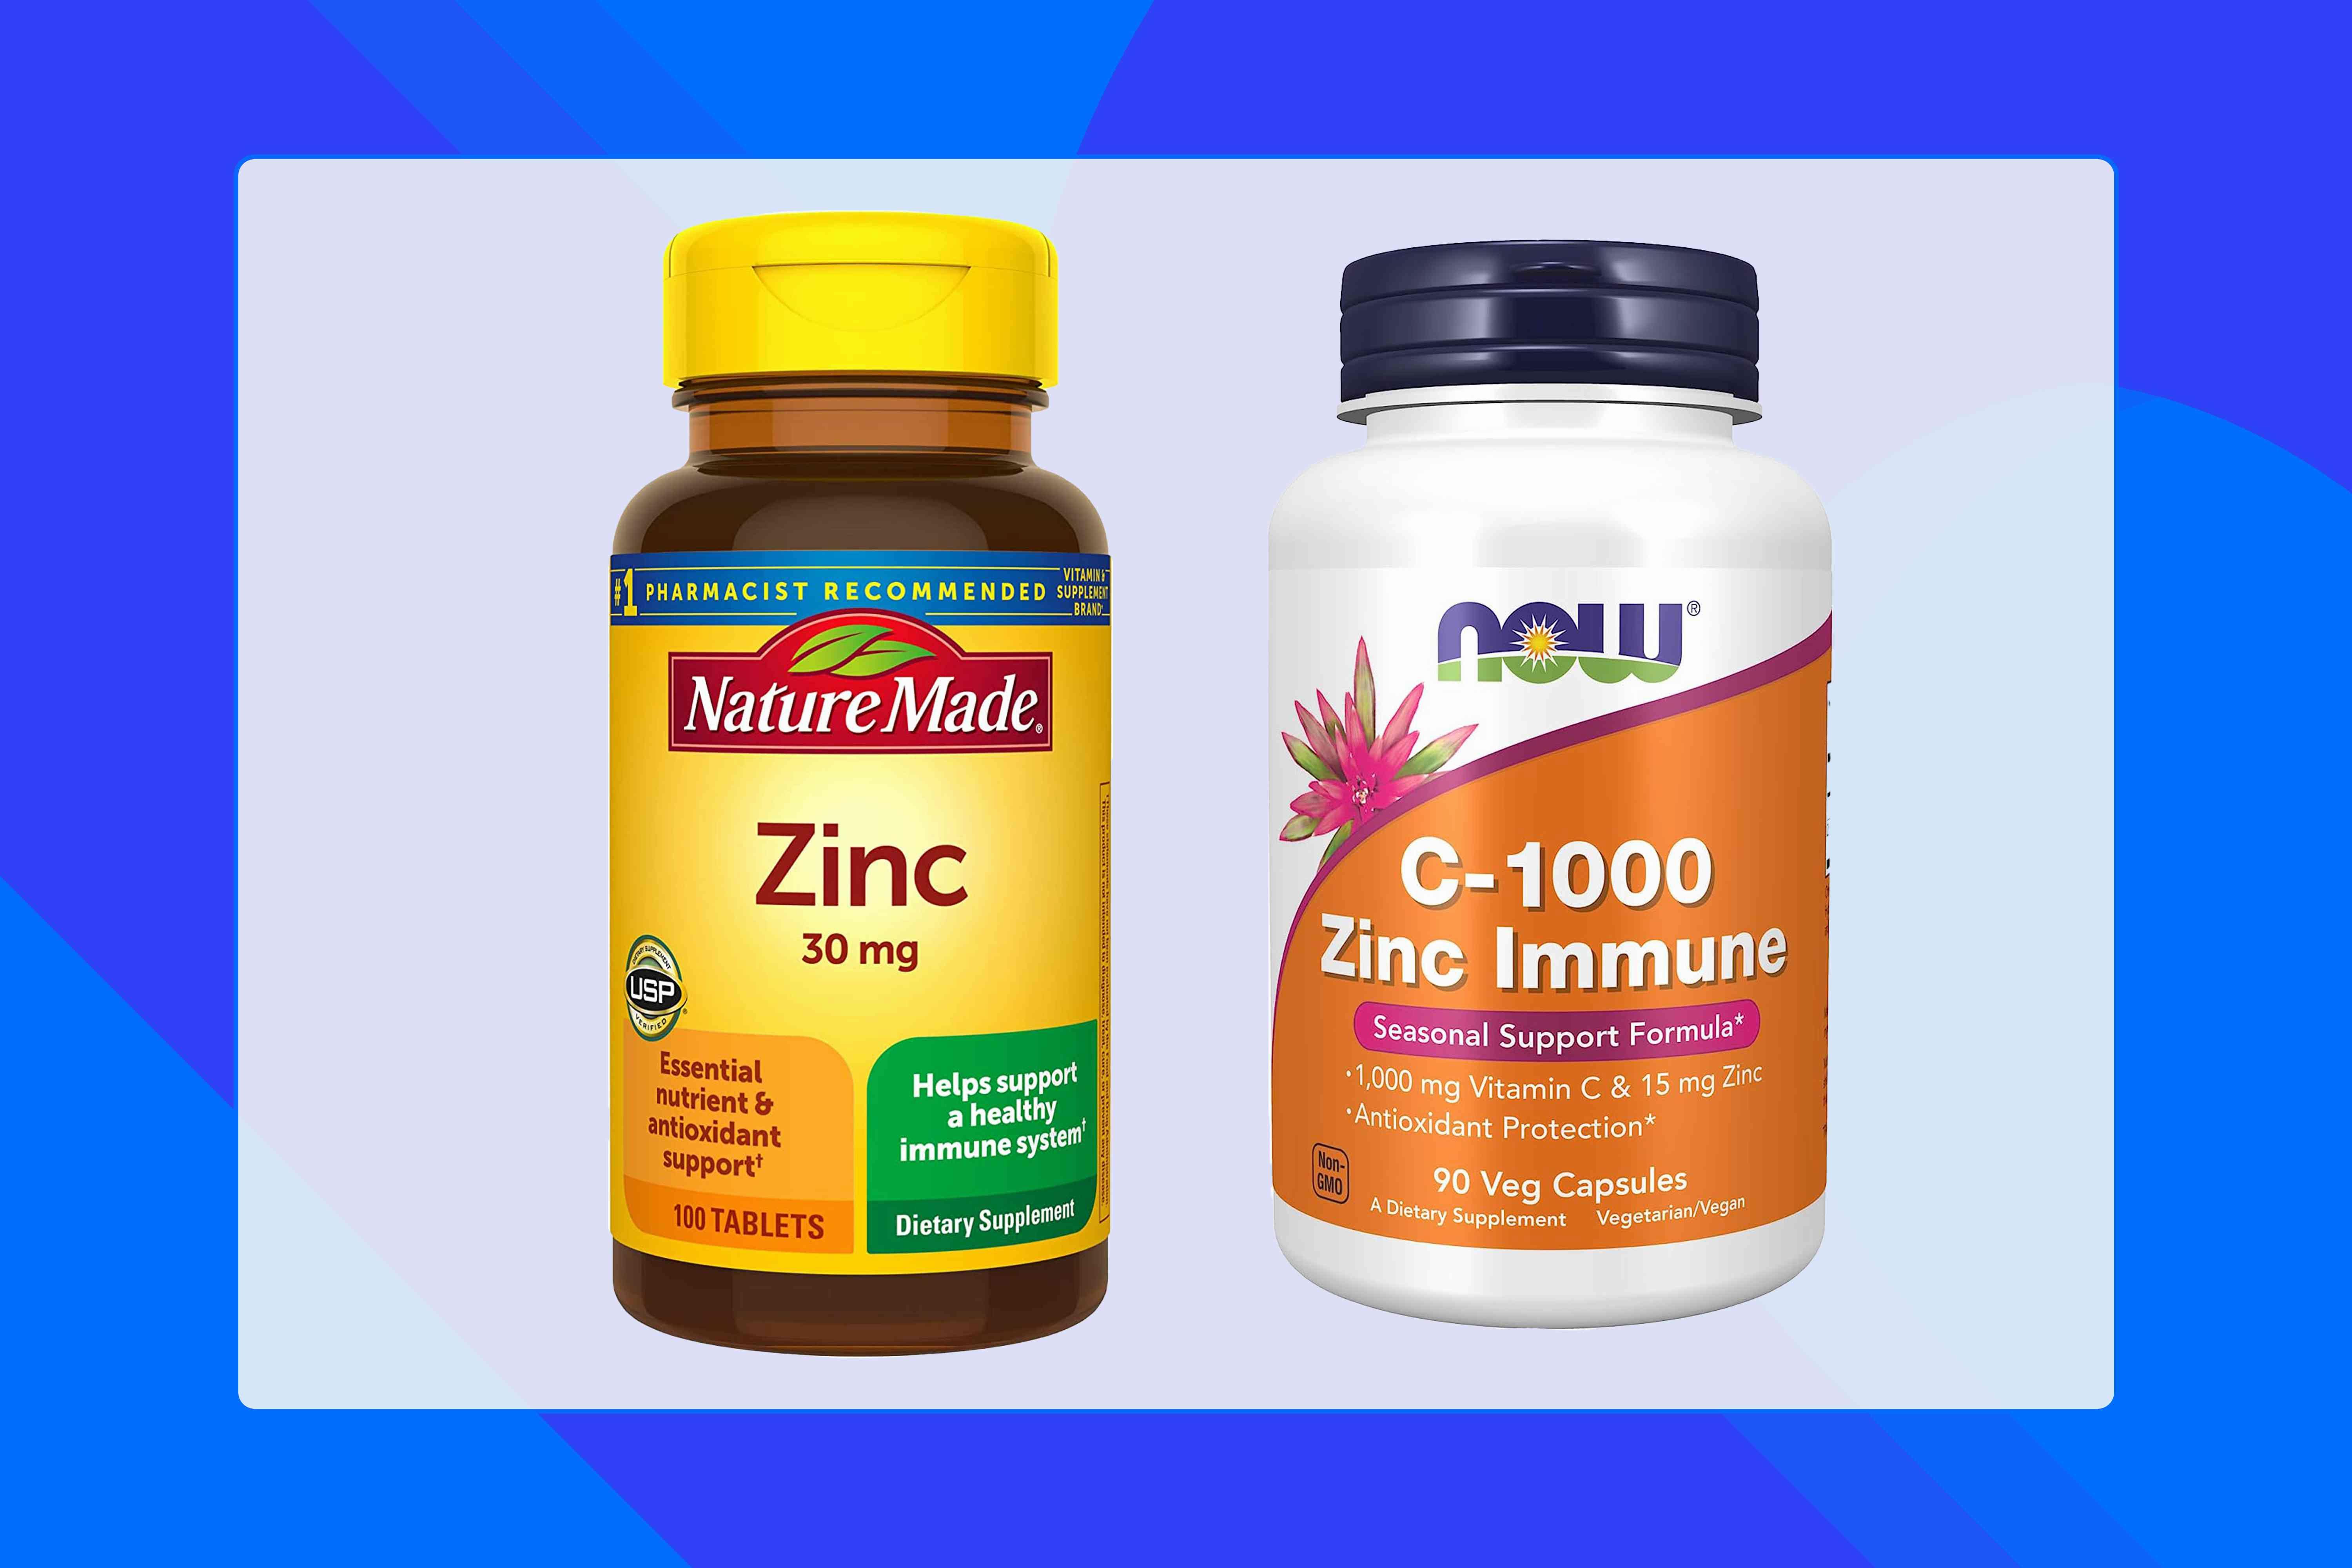 Two bottles of supplements, one labeled Nature Made Zinc and the other labeled Now C-1000 Zinc Immune.